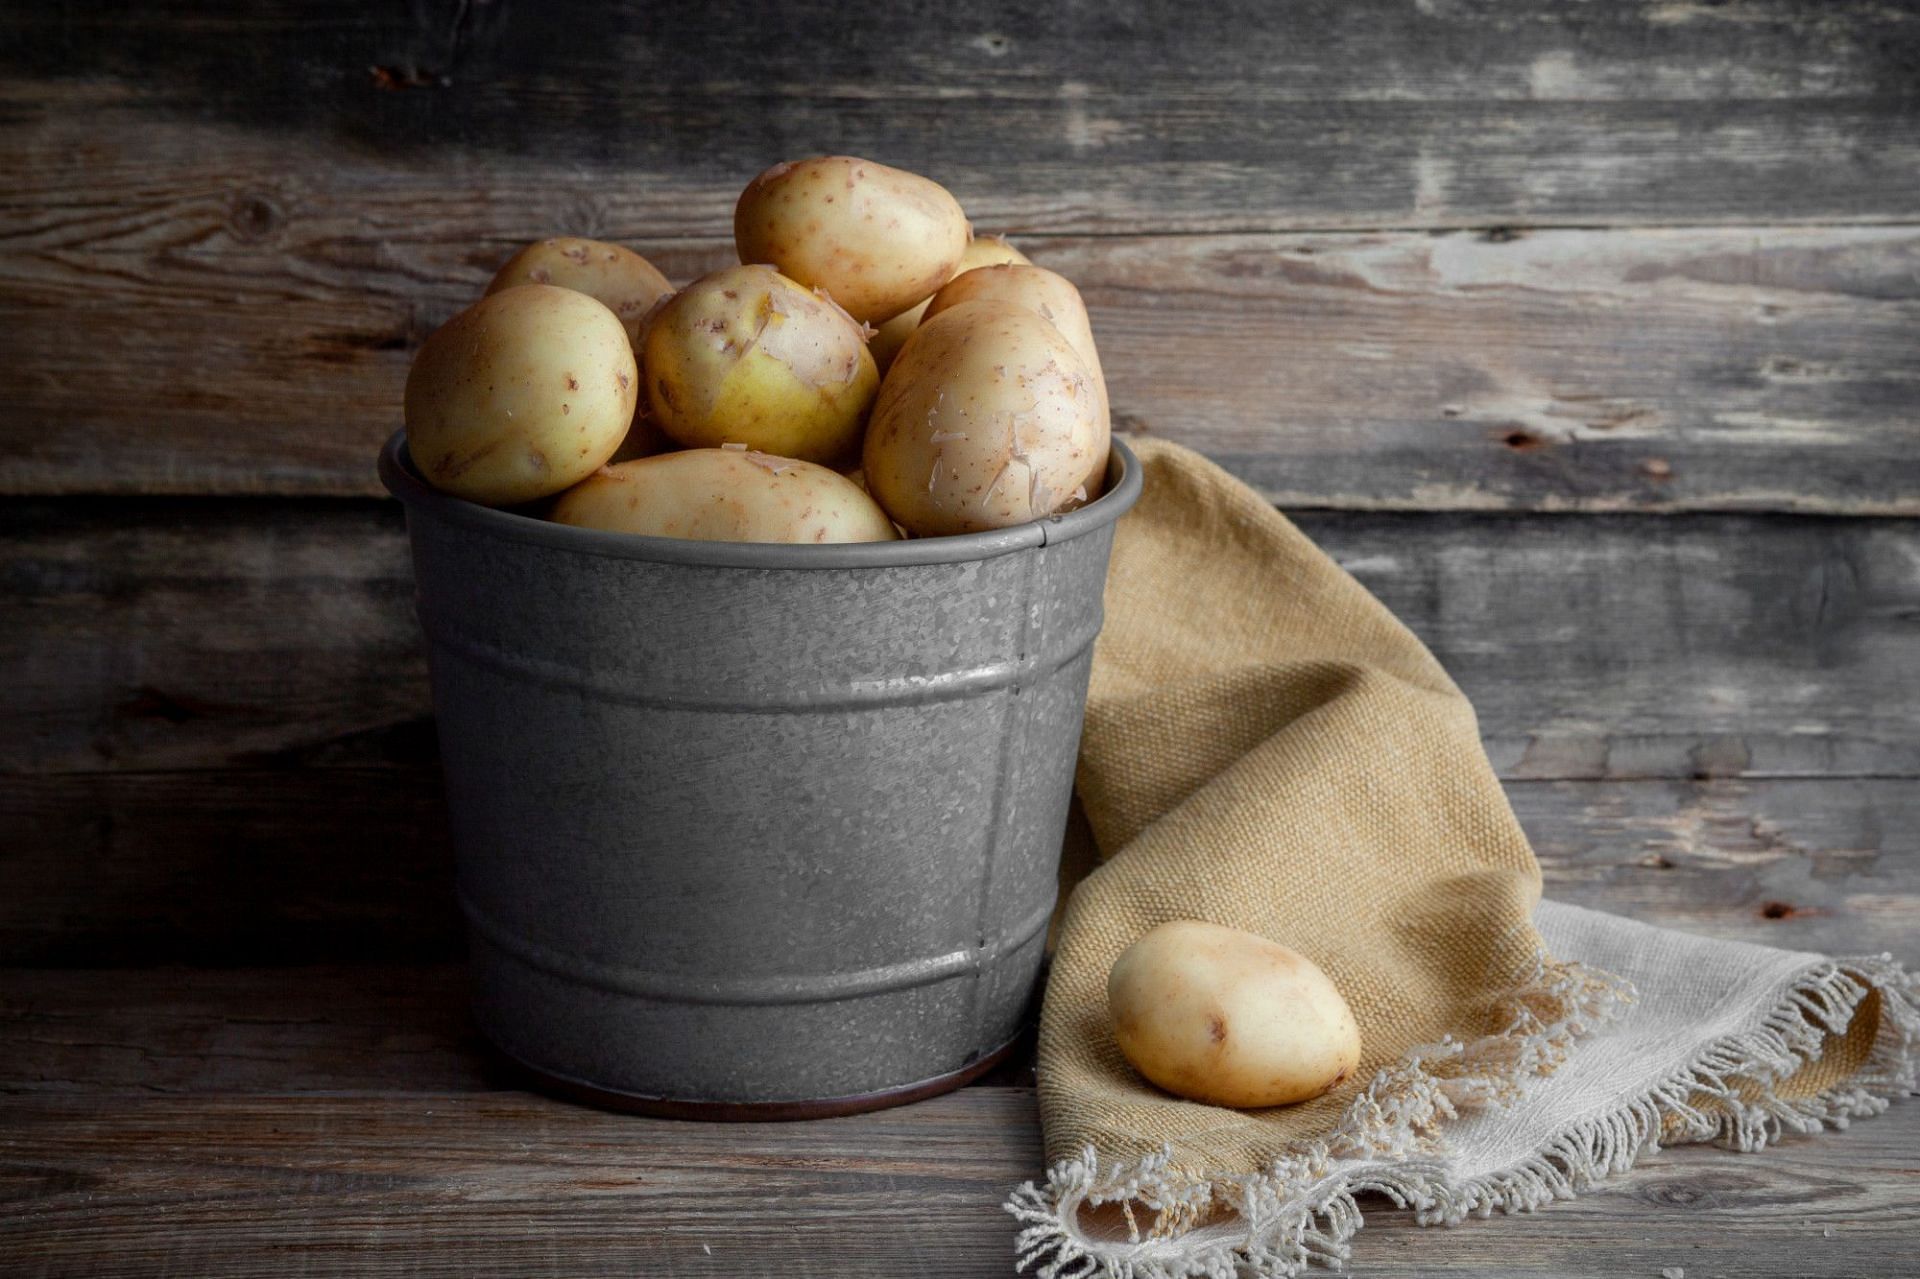 Potatoes should be stored in dry, cool, and dark places to avoid sprouts in it (Image by 8photo on Freepik)